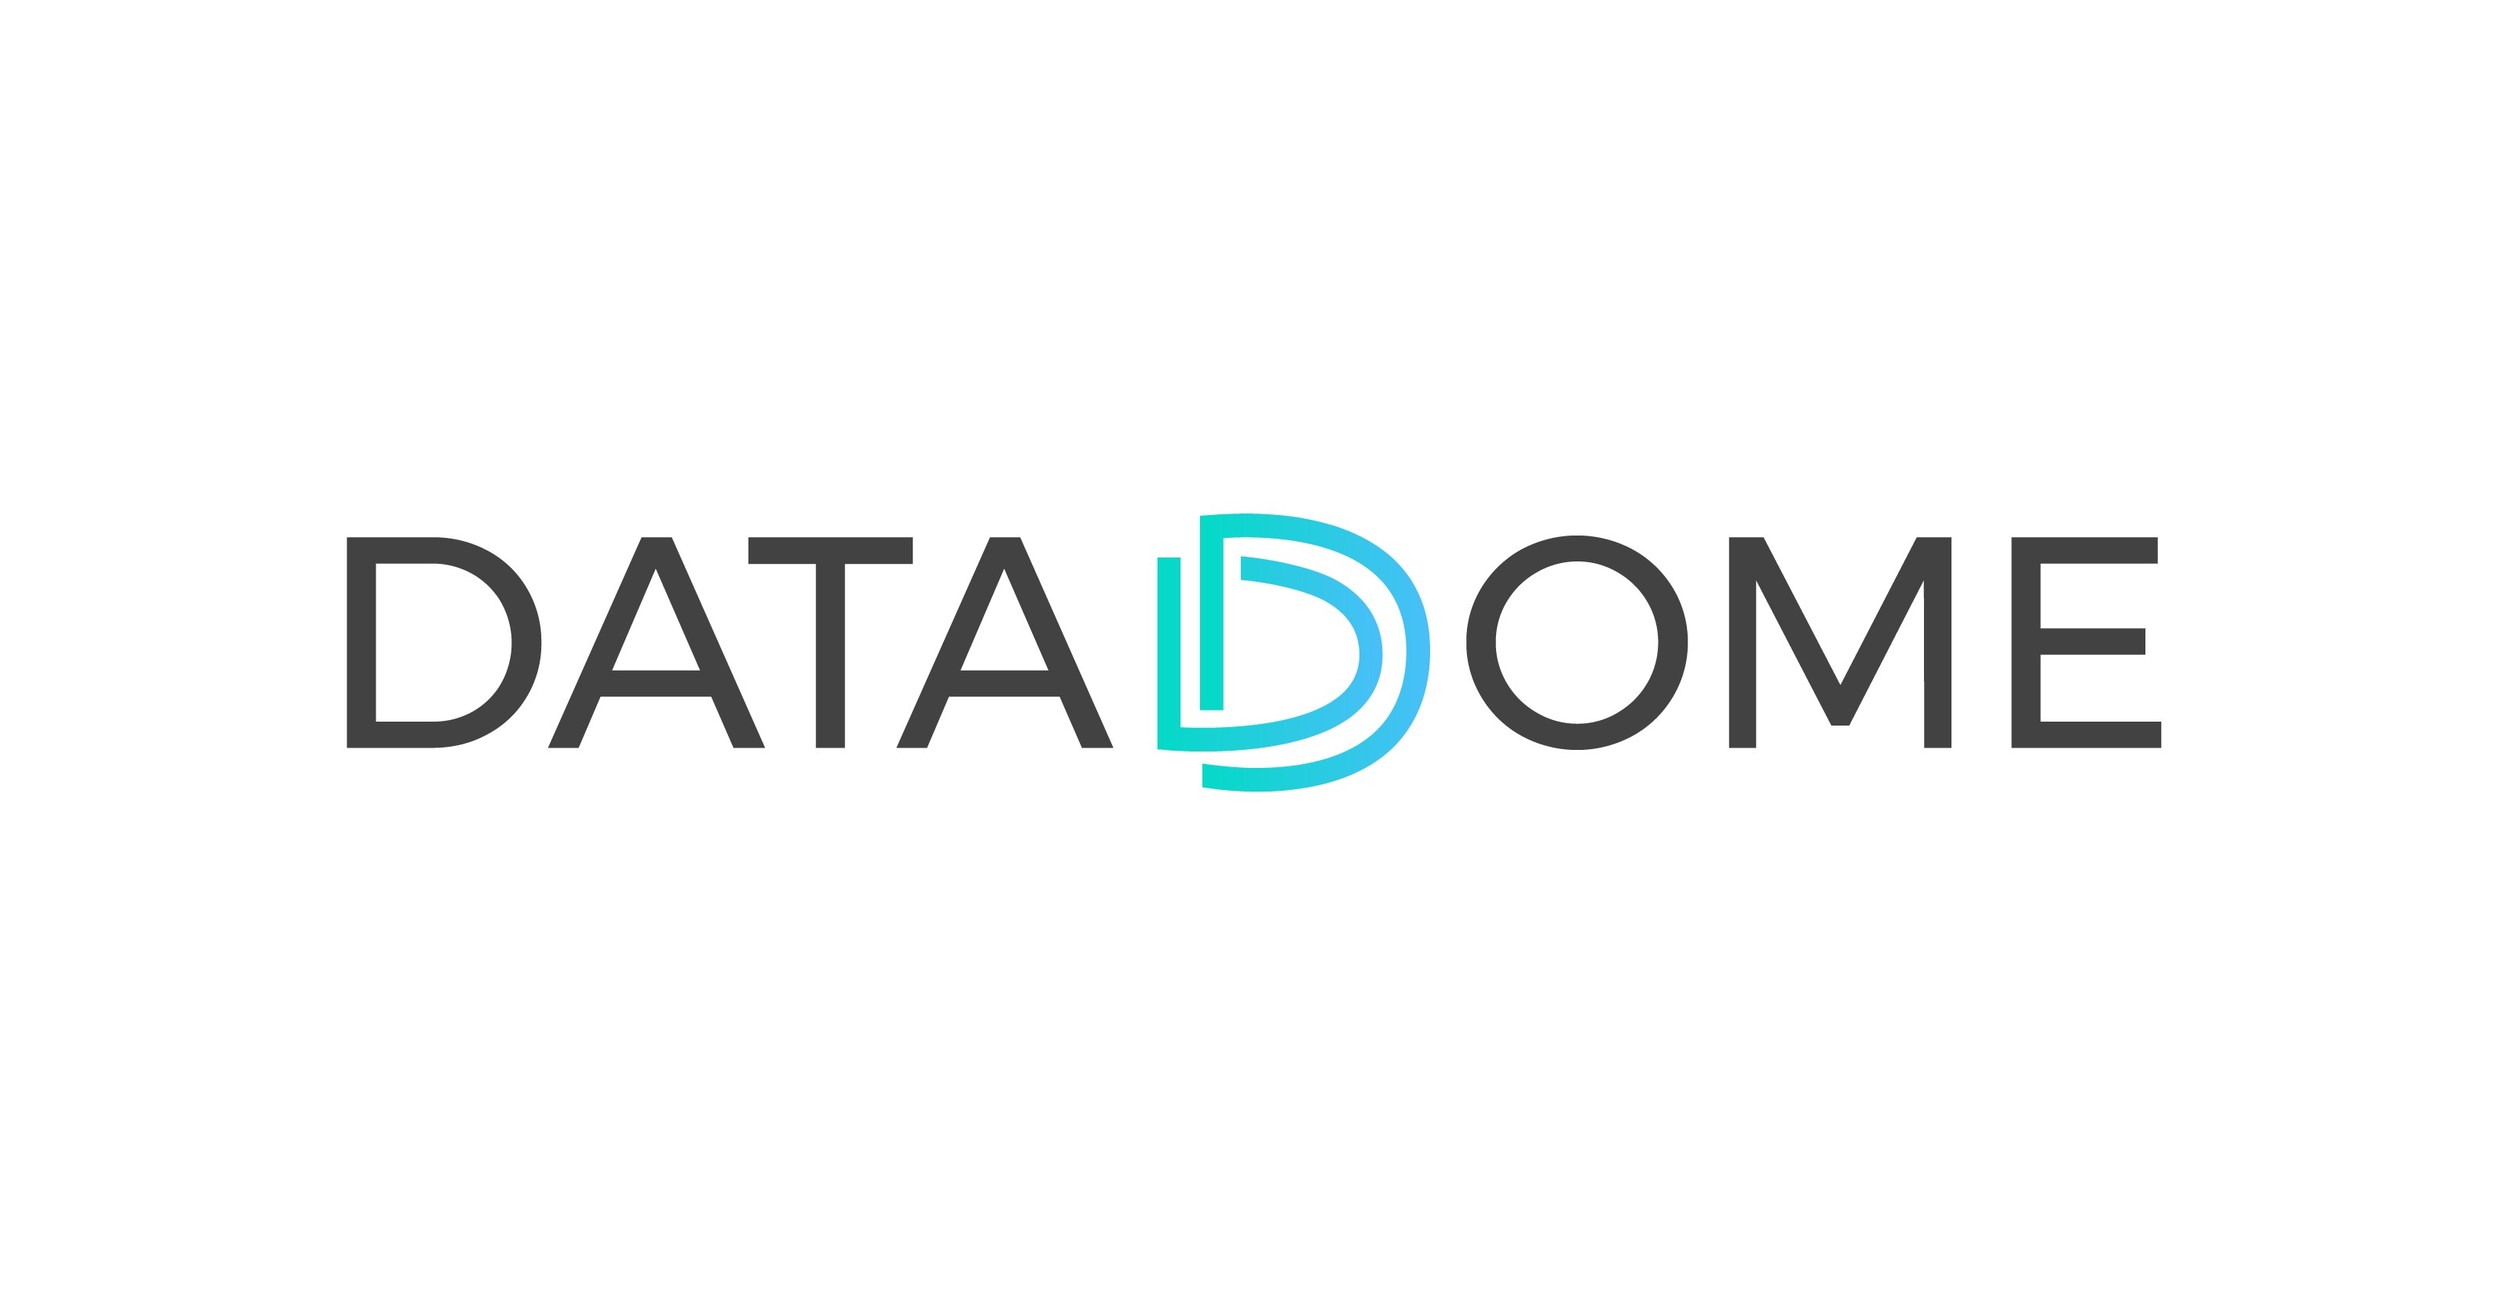 DataDome Is Certified™ as a Great Place to Work, Ranks Among Top 3% of Companies